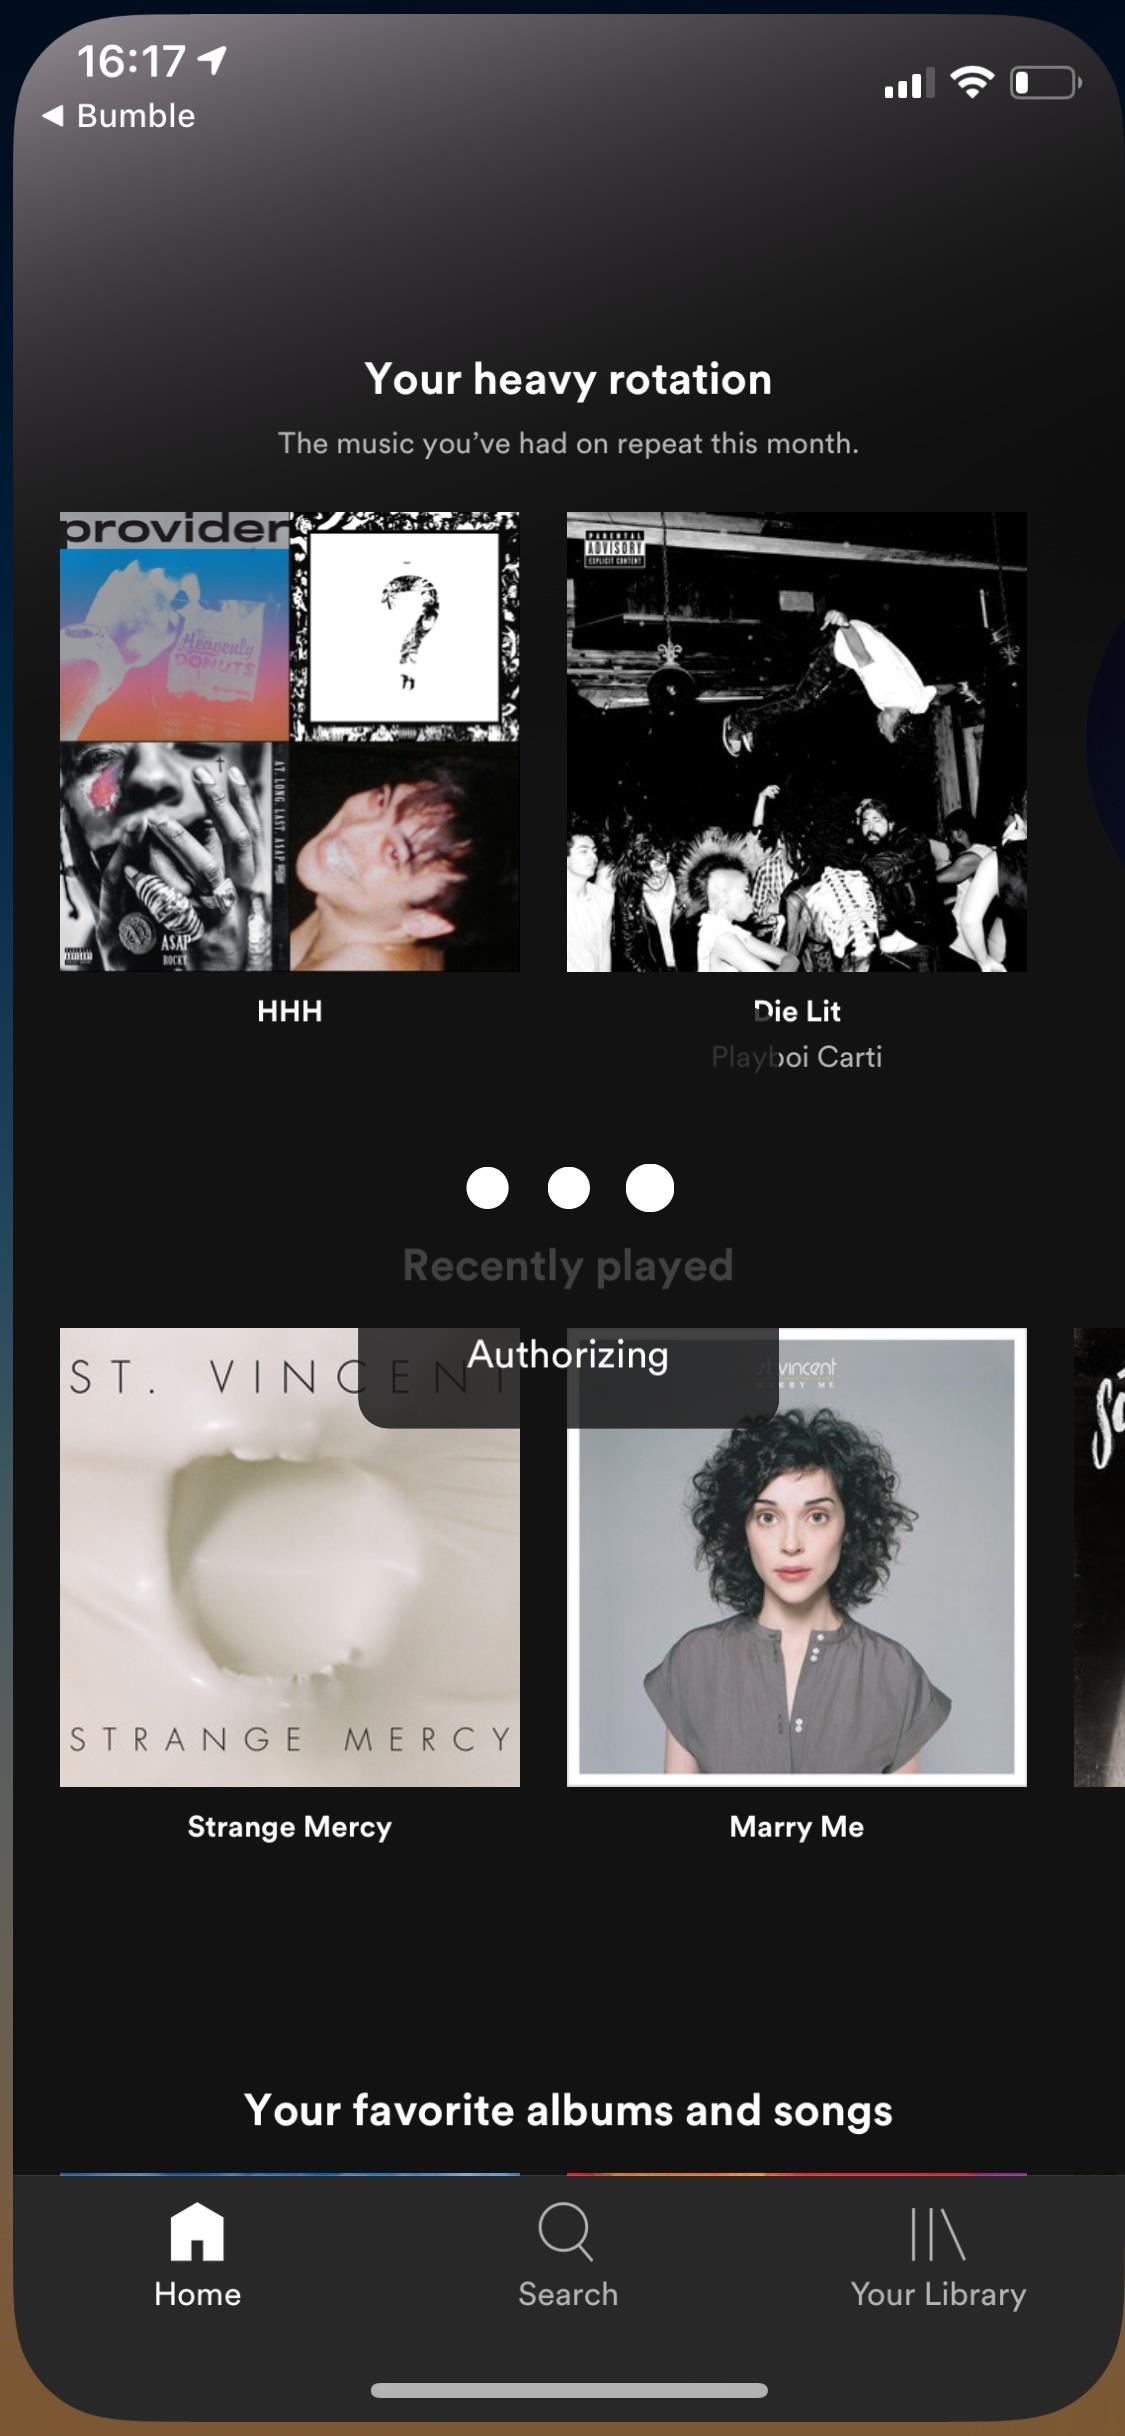 How to Update Your Spotify Top List on Bumble to Get Better Matches for Music Tastes